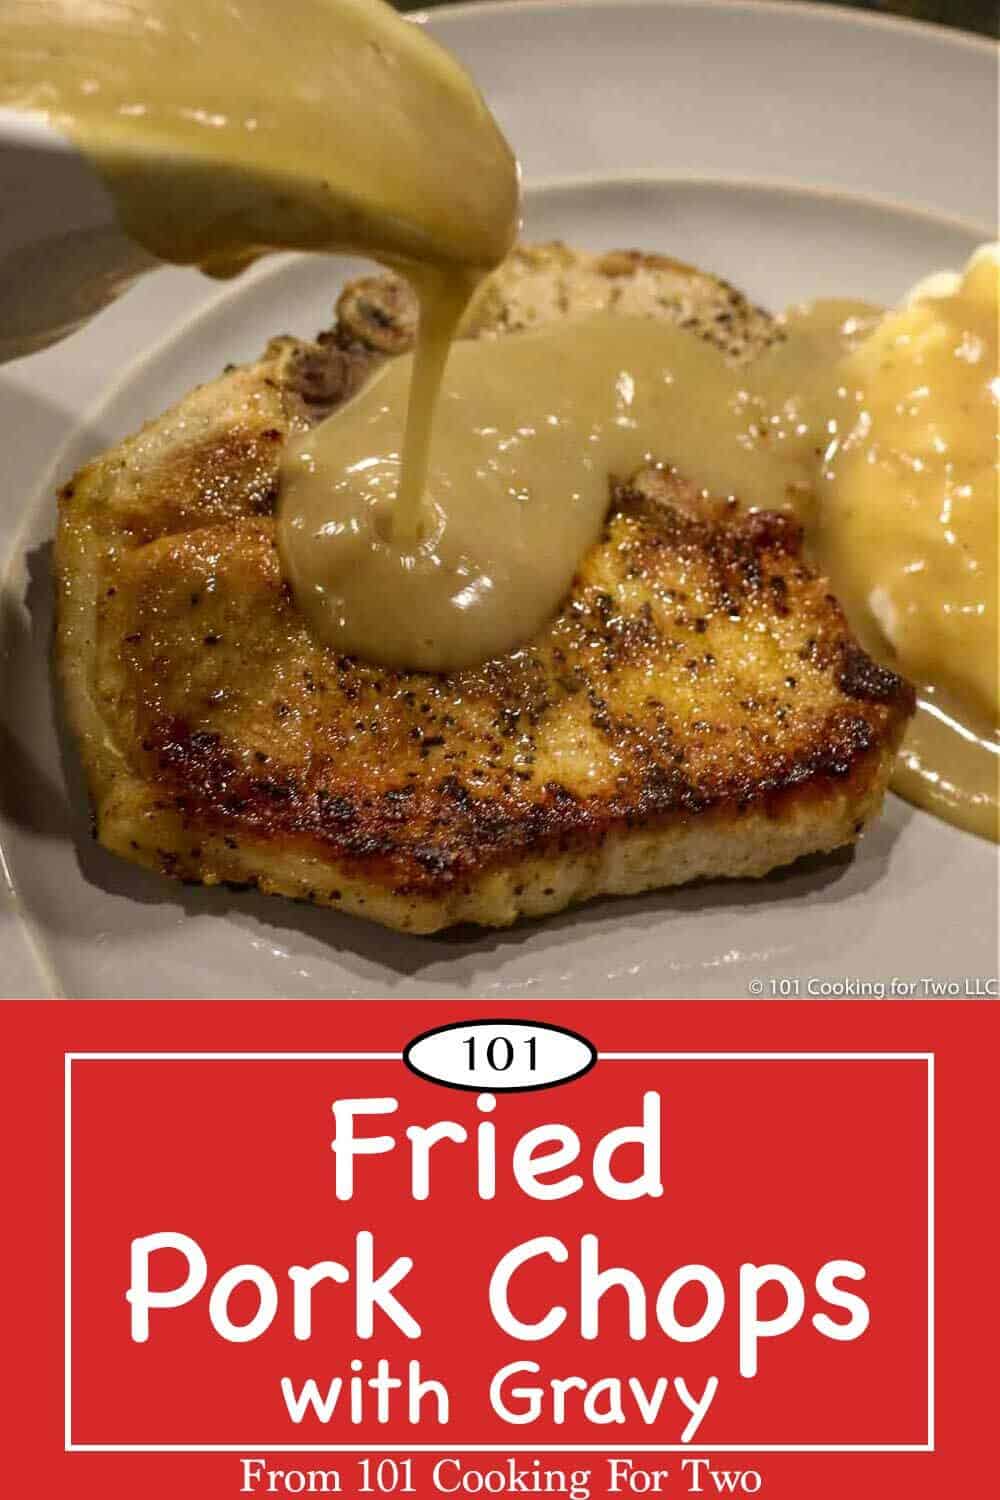 Old fashion stove top fried pork chops with gravy like grandma made in less than 30 minutes. Just follow the easy step by step photo instructions. Sometimes the old way is the best way. #PorkChops #StoveTopPorkChops #FriedPorkChops